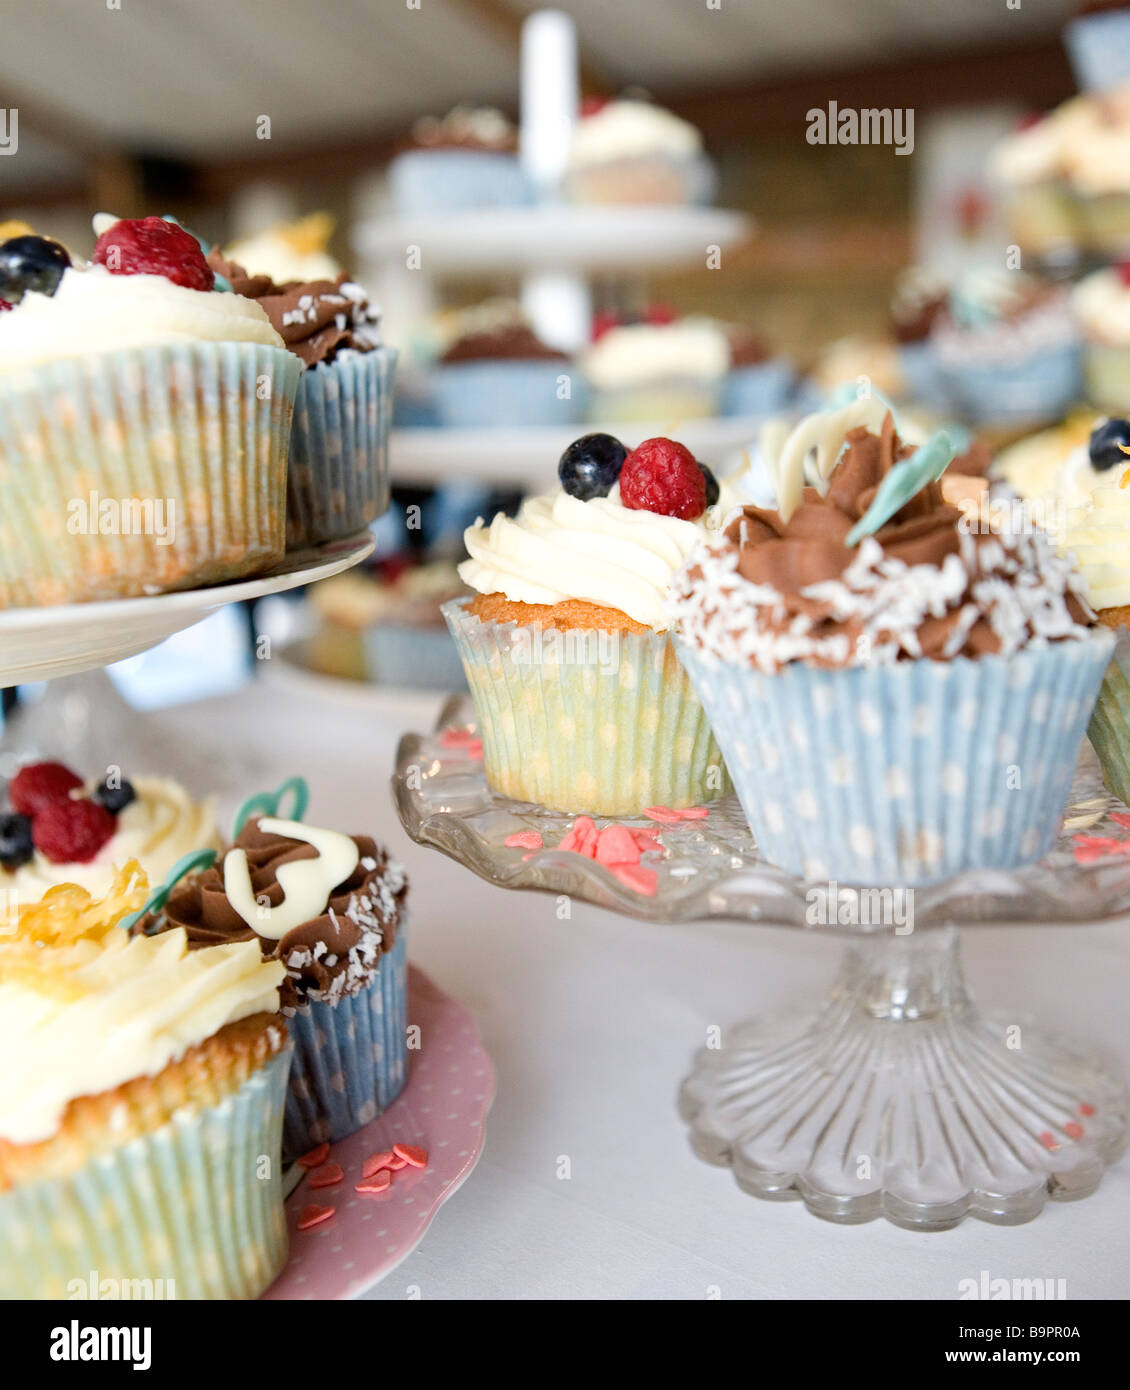 Fairy Cakes on Cake Stands Stock Photo